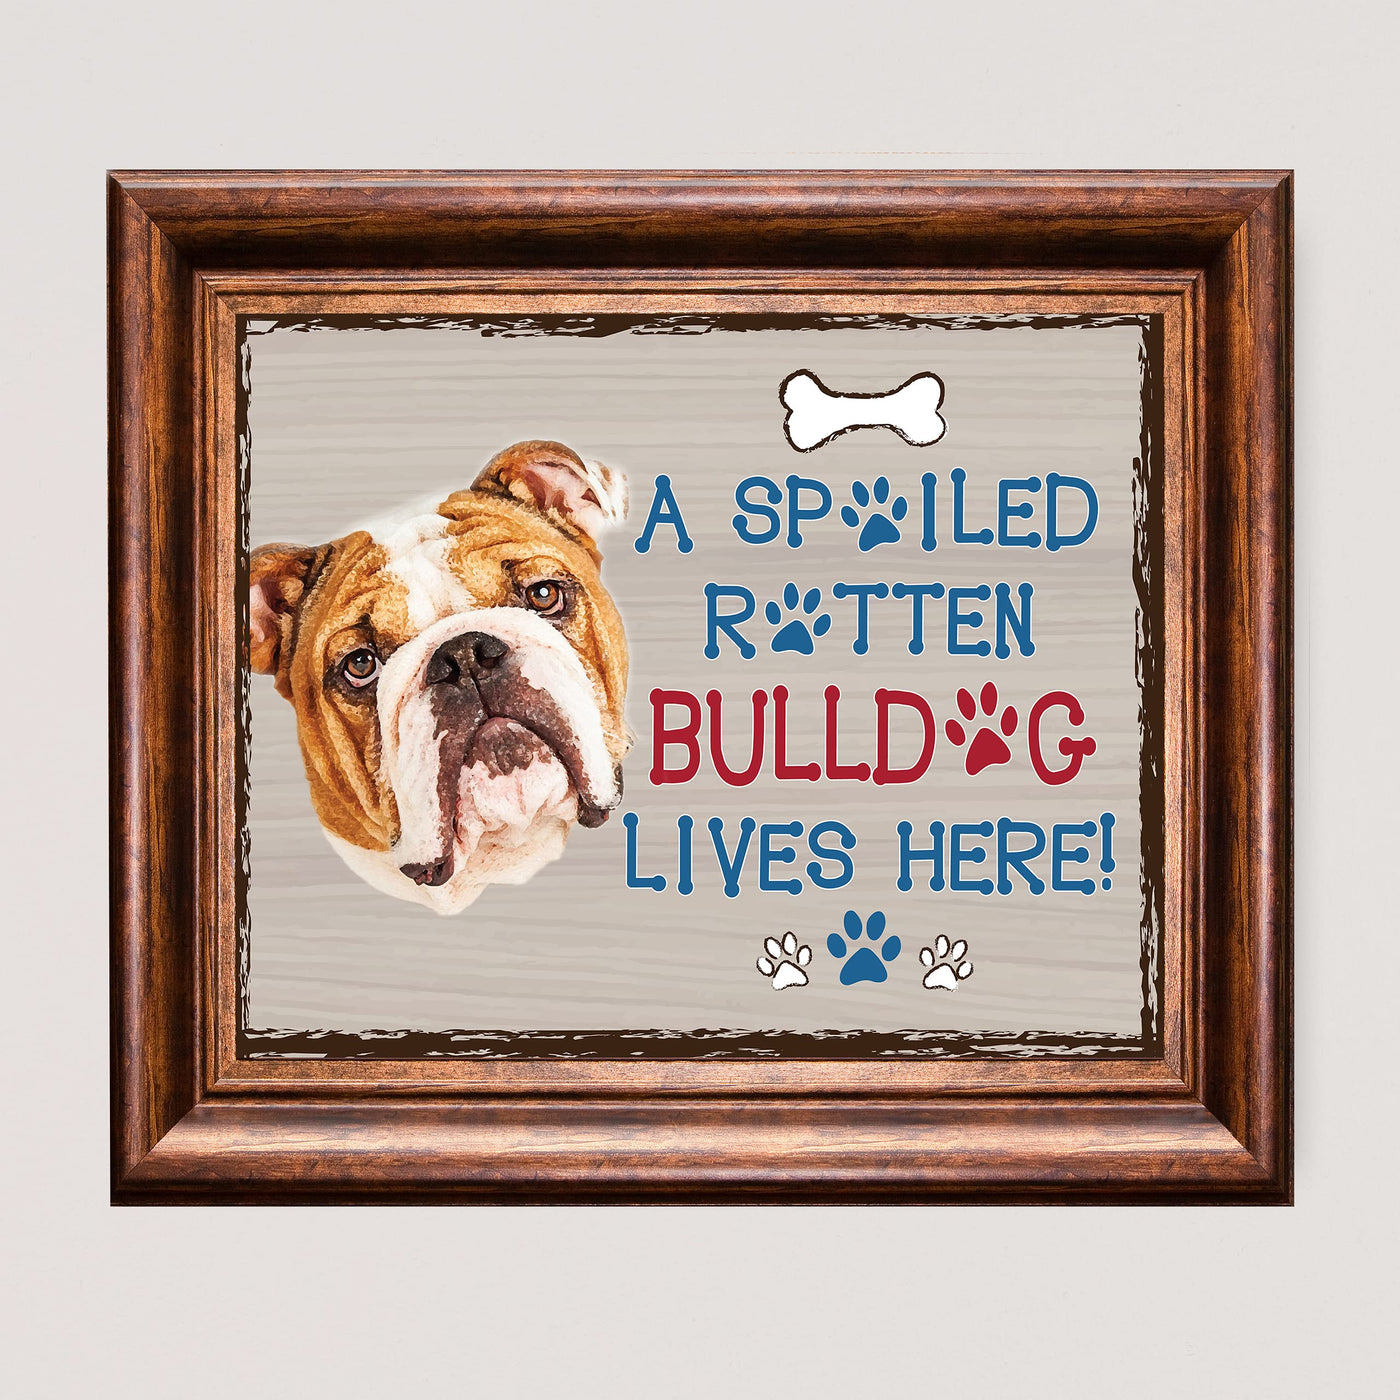 Bulldog-Dog Poster Print- 10 x 8" Wall Decor Sign-Ready To Frame."A Spoiled Rotten Bulldog Lives Here". Perfect Pet Wall Art for Home-Kitchen-Cave-Bar-Garage. Great Gift for All Bulldog Lovers.